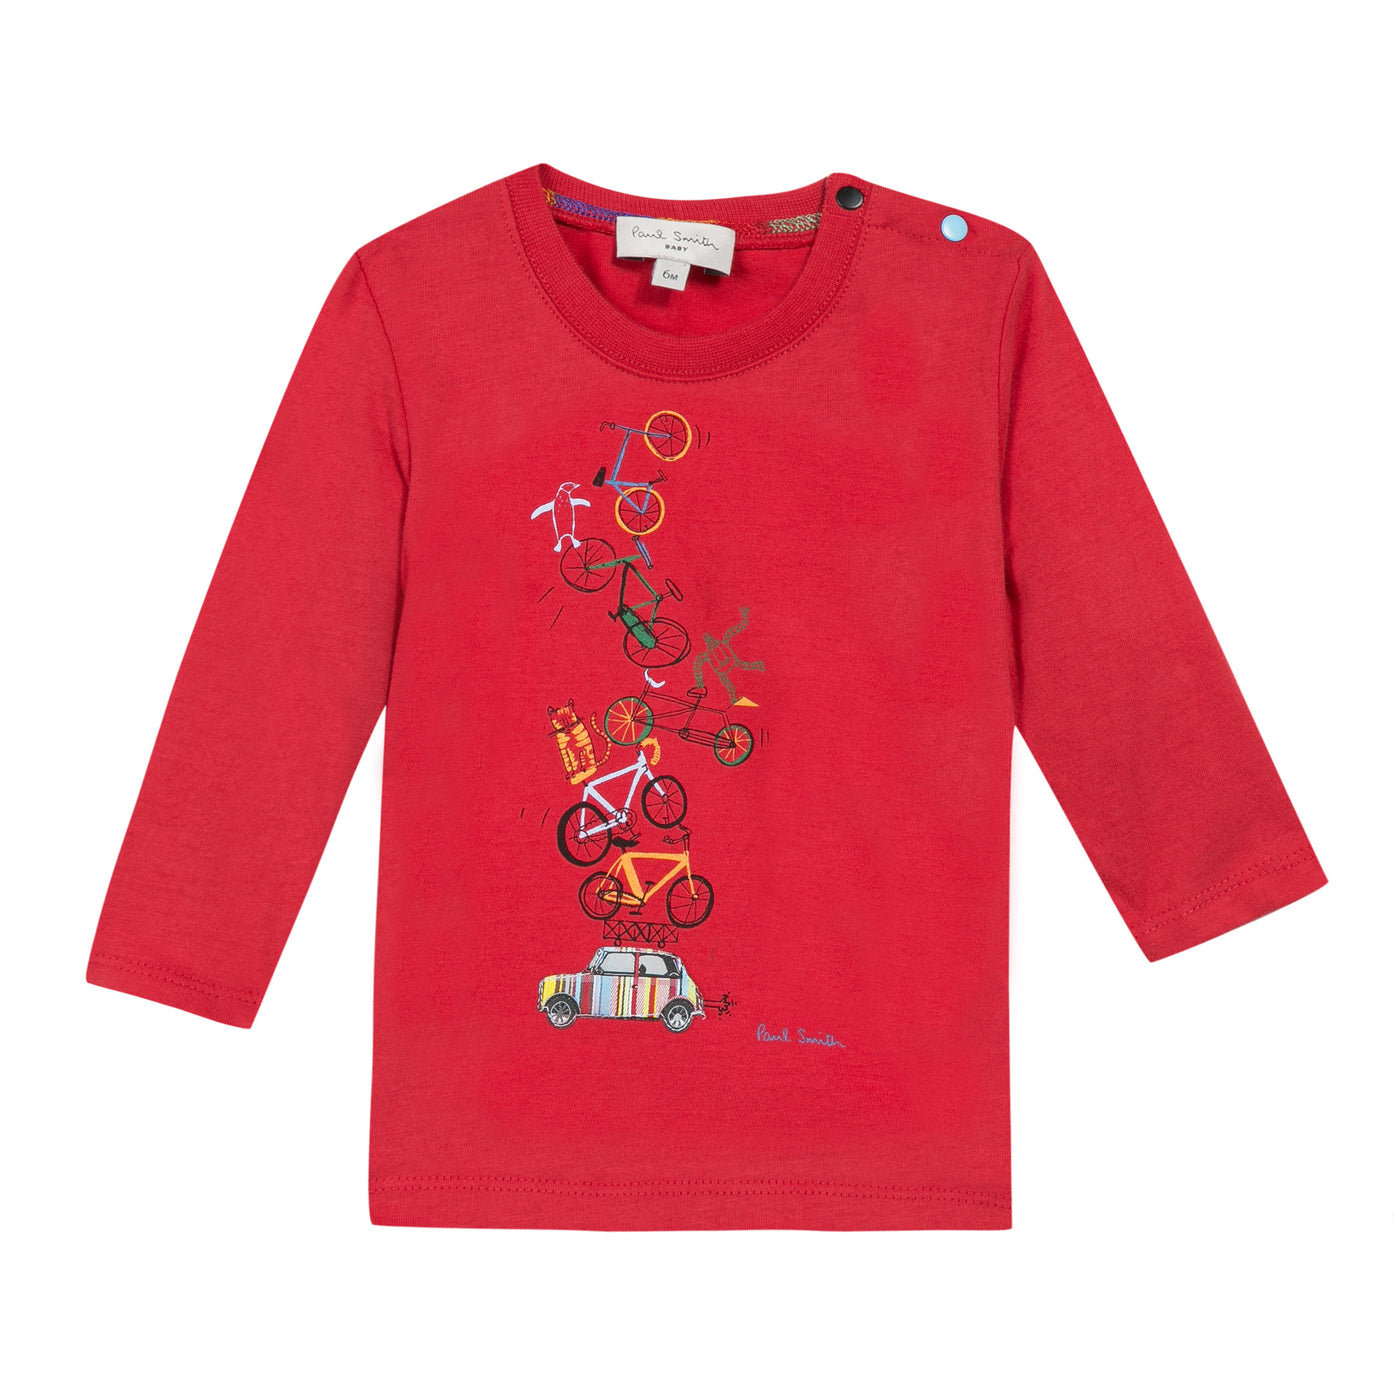 Paul Smith Junior Baby "Bicycles Poppet" Red Long Sleeve Tee Shirt 5K10521-362